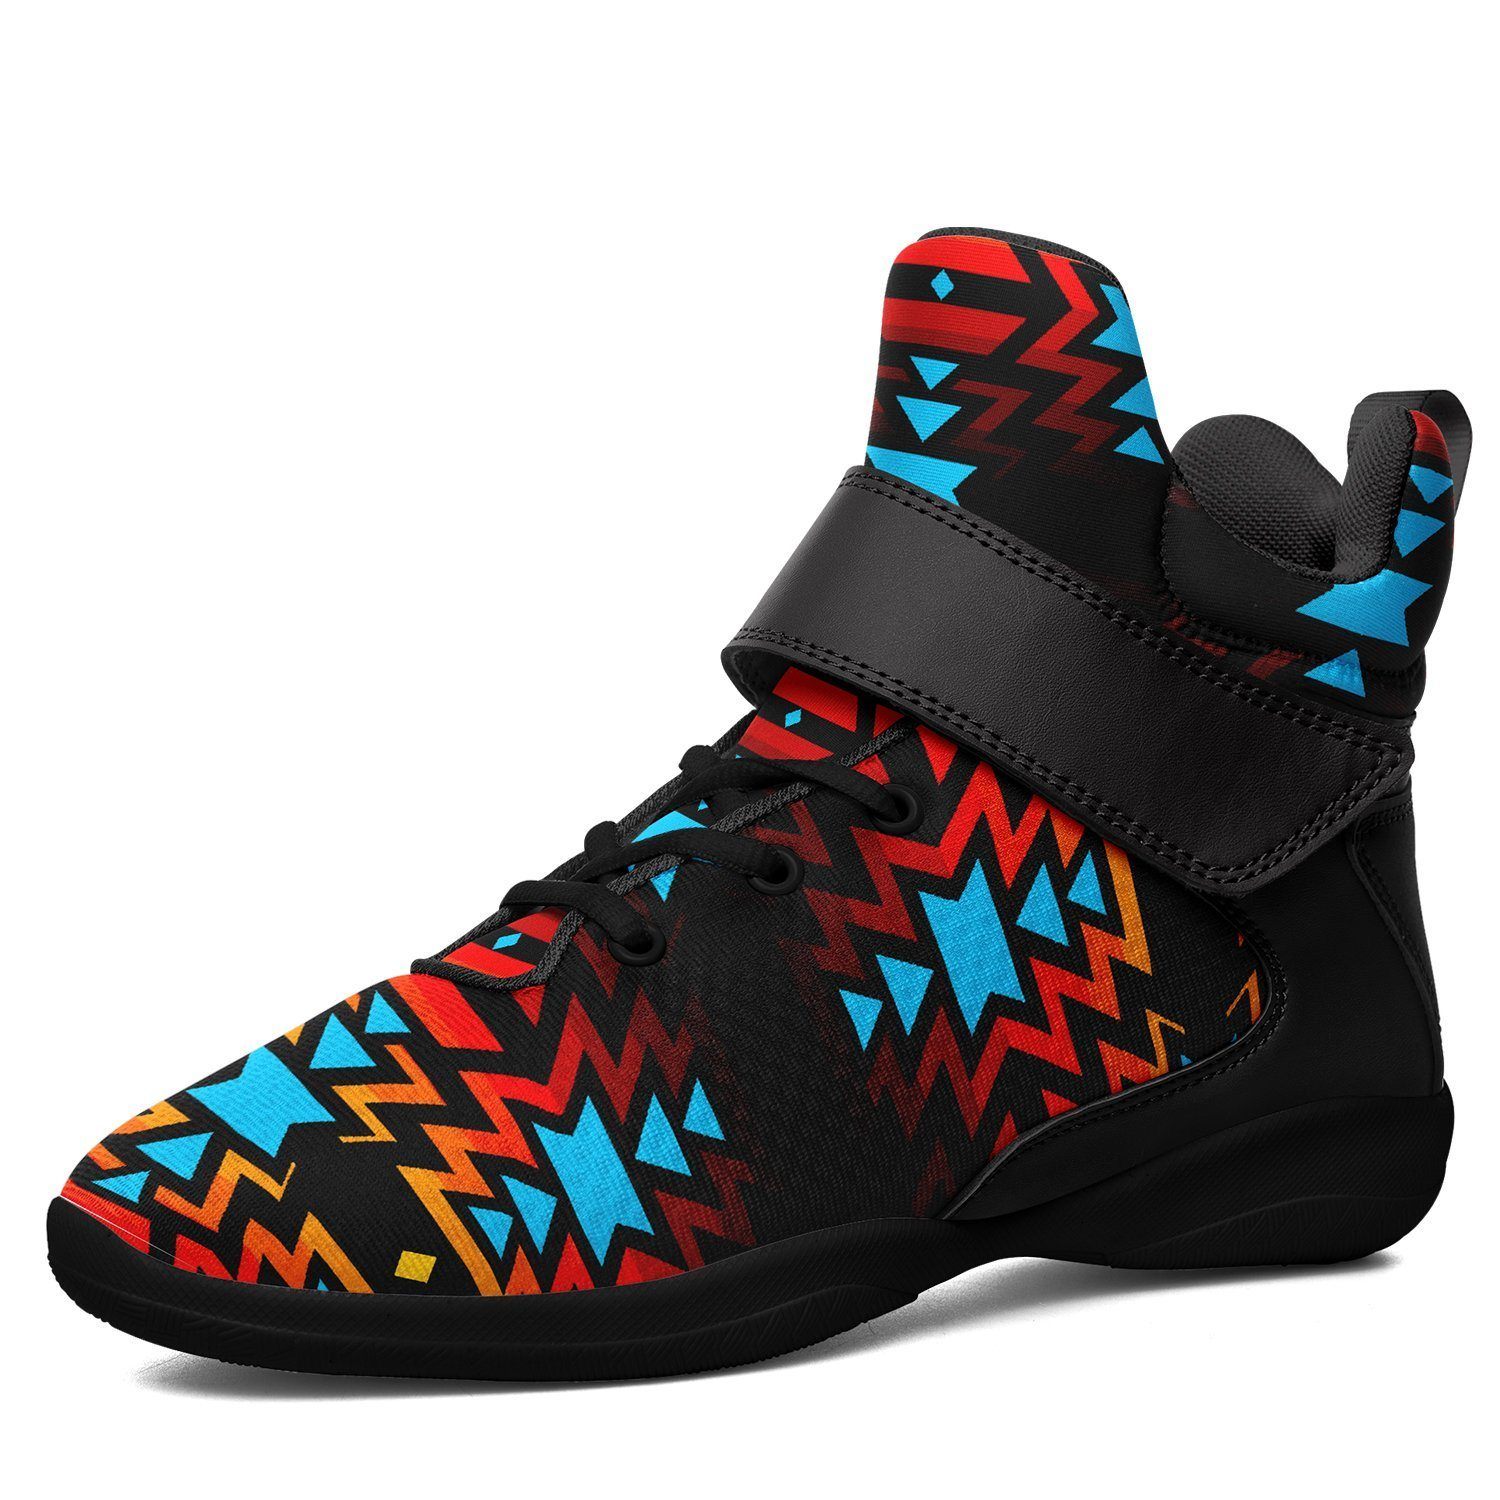 Black Fire and Turquoise Kid's Ipottaa Basketball / Sport High Top Shoes 49 Dzine US Child 12.5 / EUR 30 Black Sole with Black Strap 